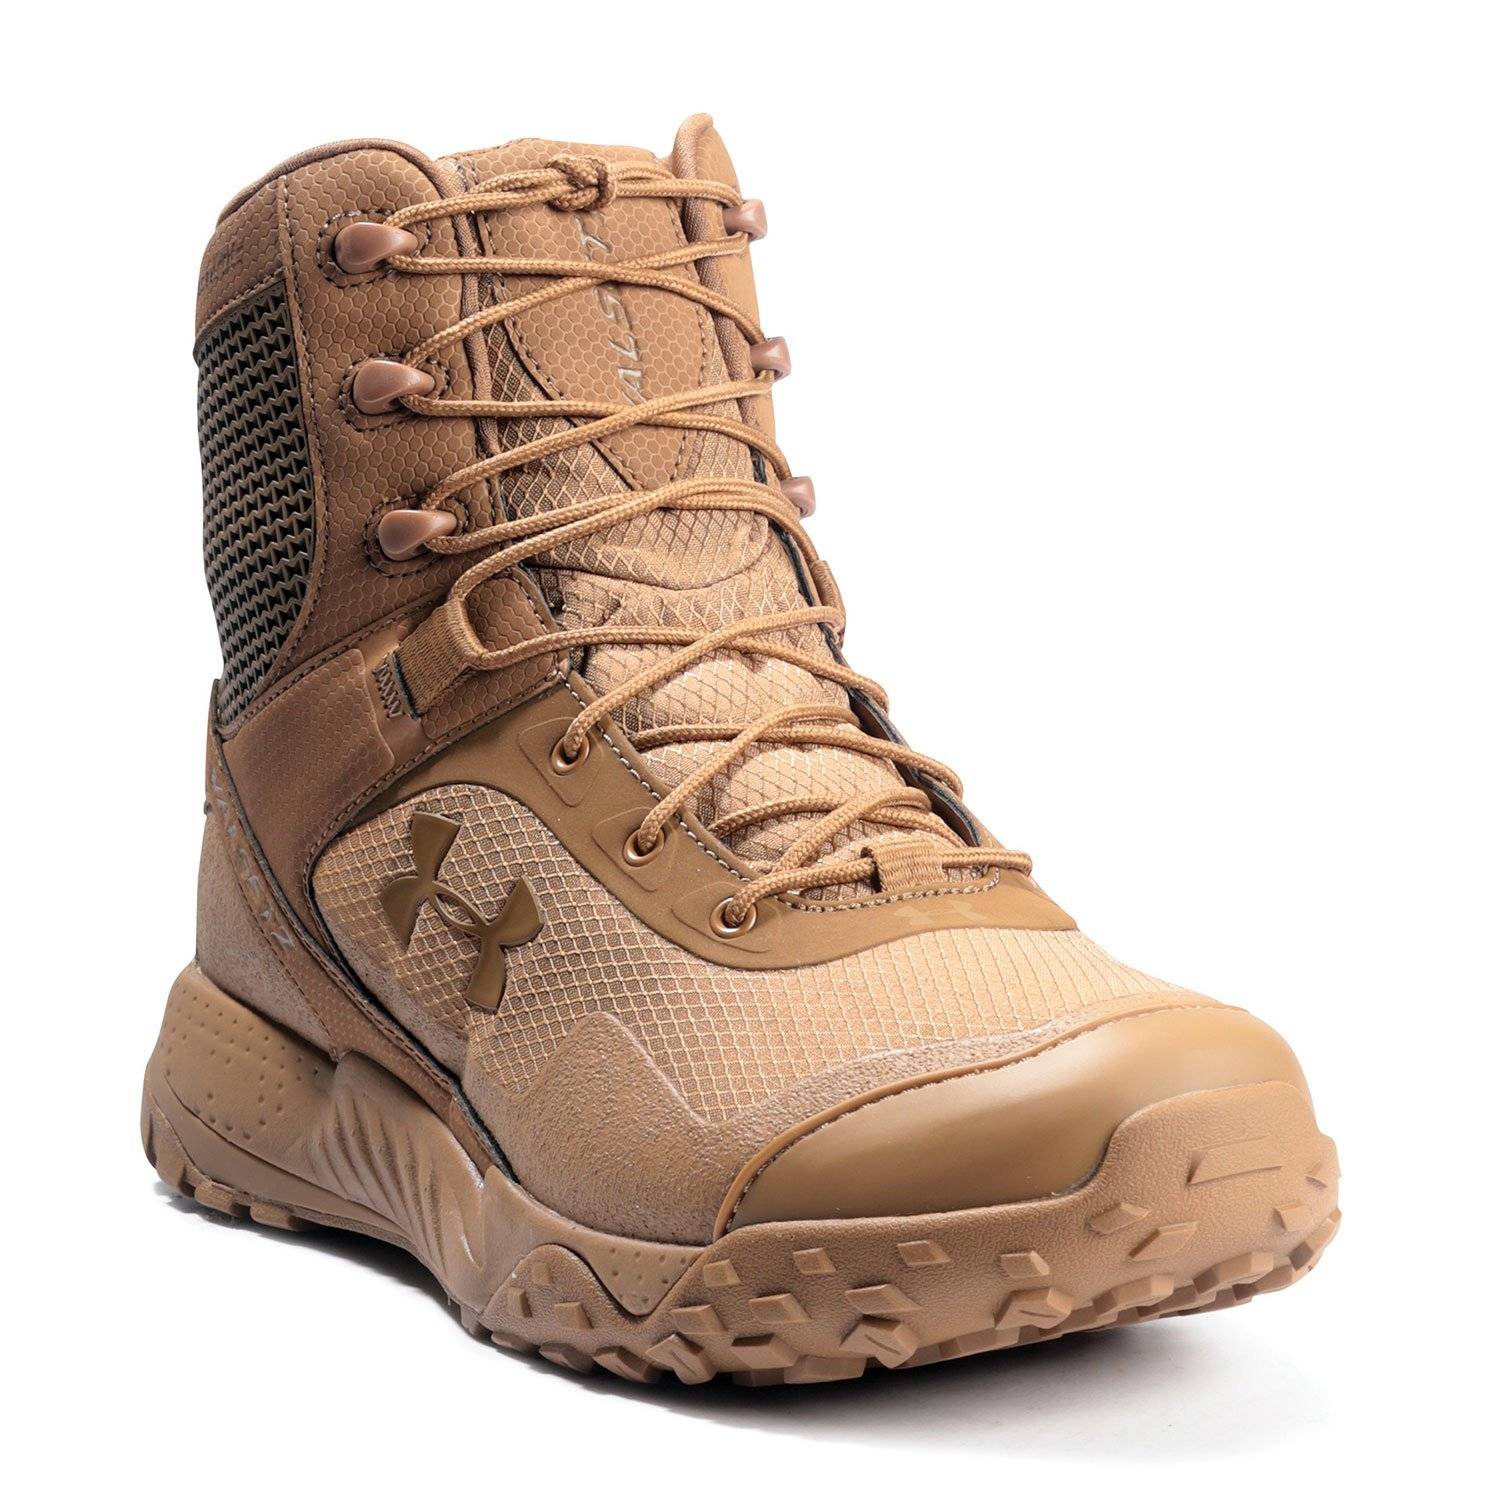 under armor tac boots